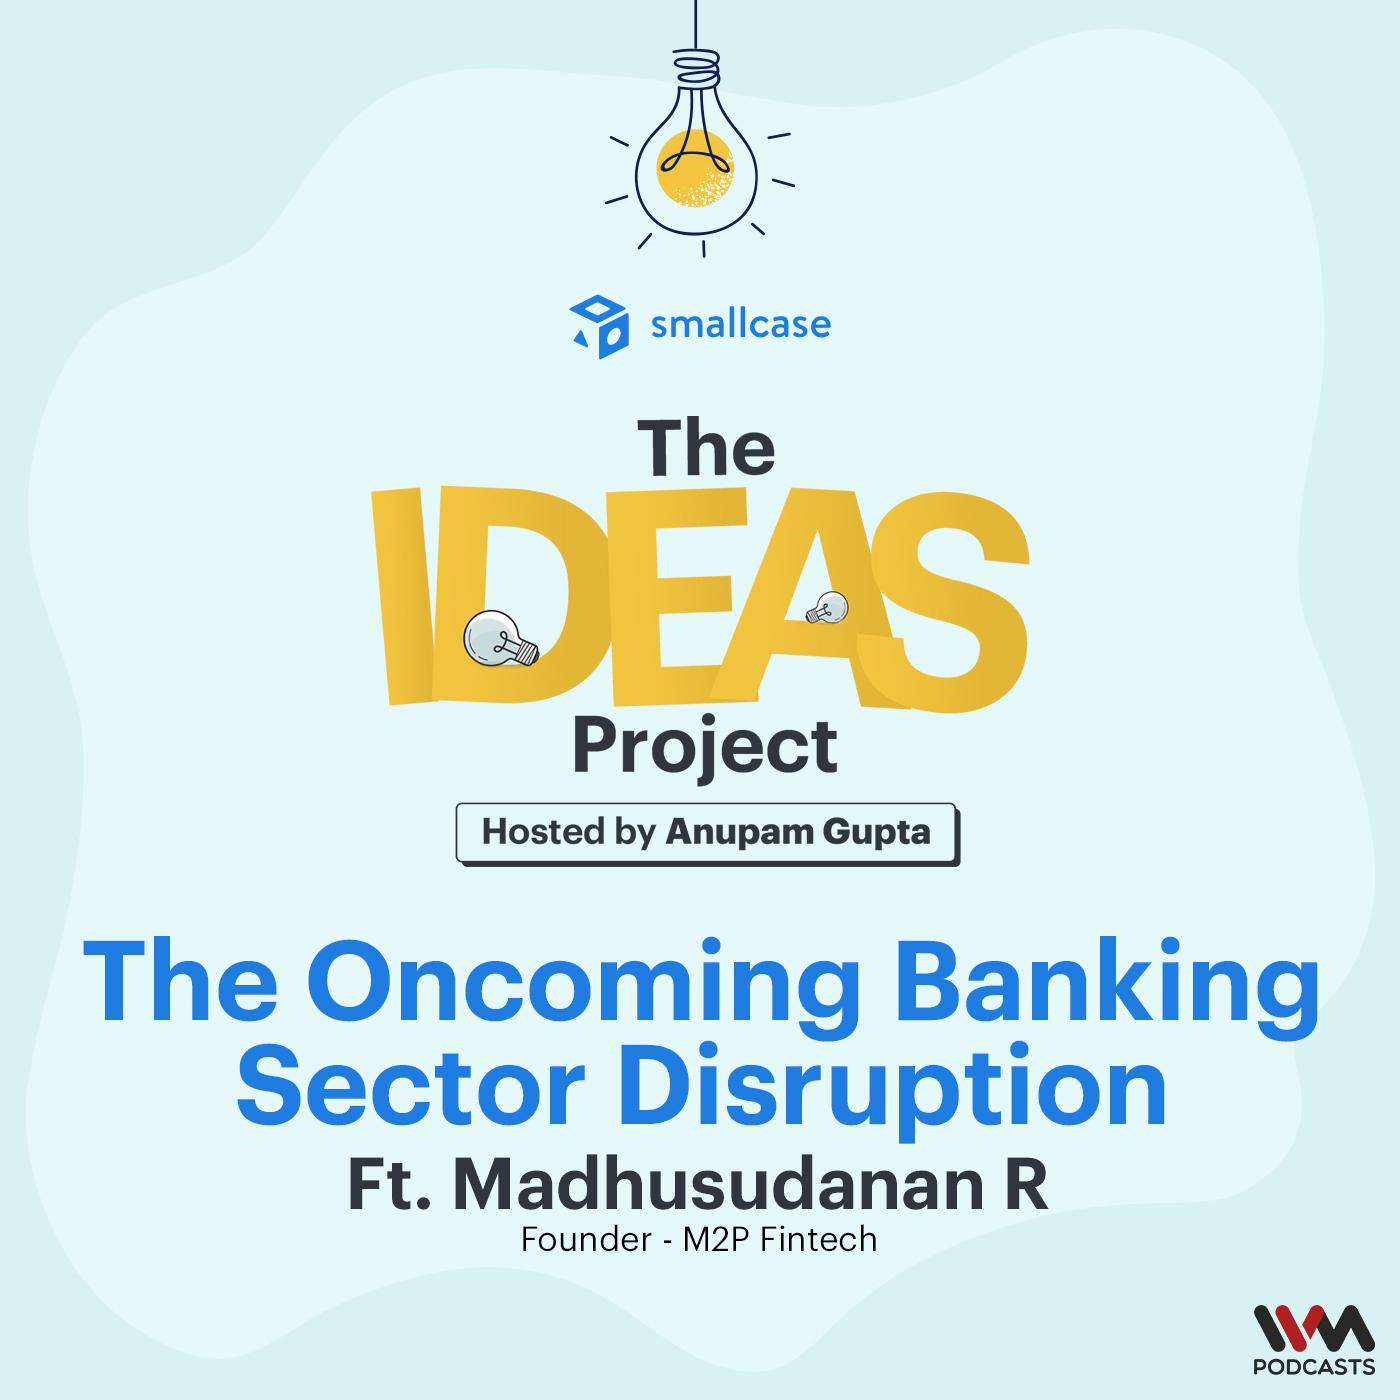 The Oncoming Banking Sector Disruption ft. Madhusudanan R